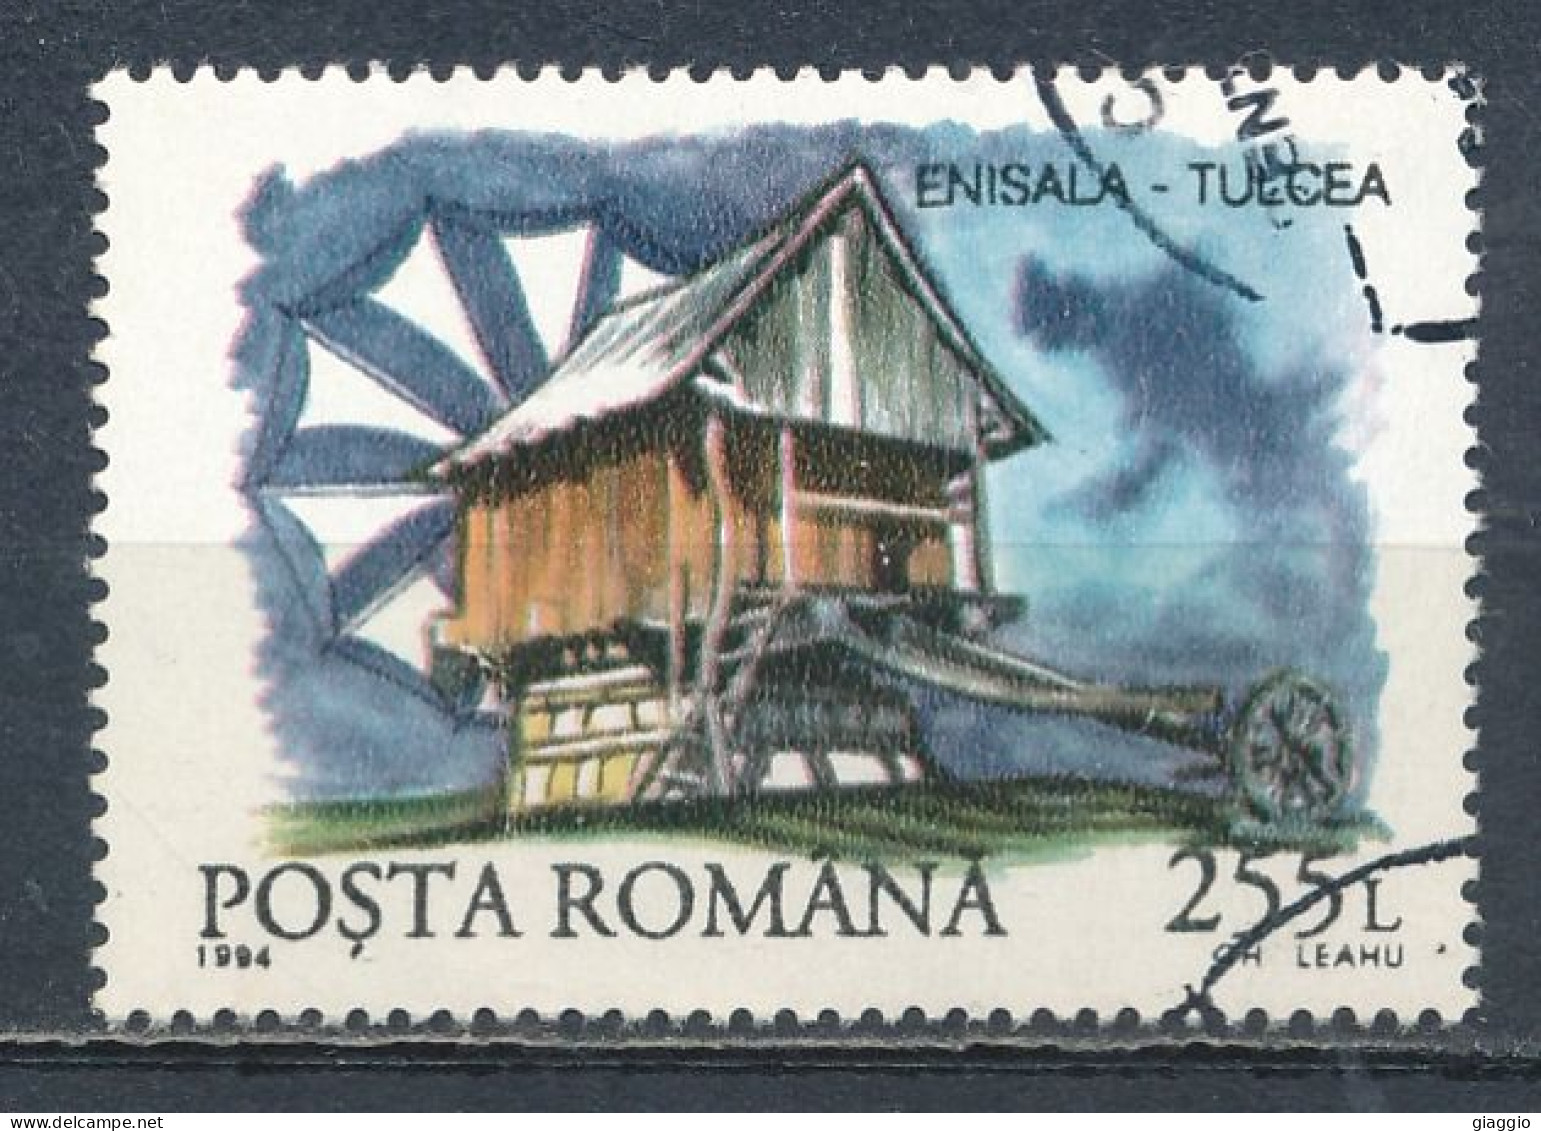 °°° ROMANIA - Y&T N° 4144 - 1994 °°° - Used Stamps